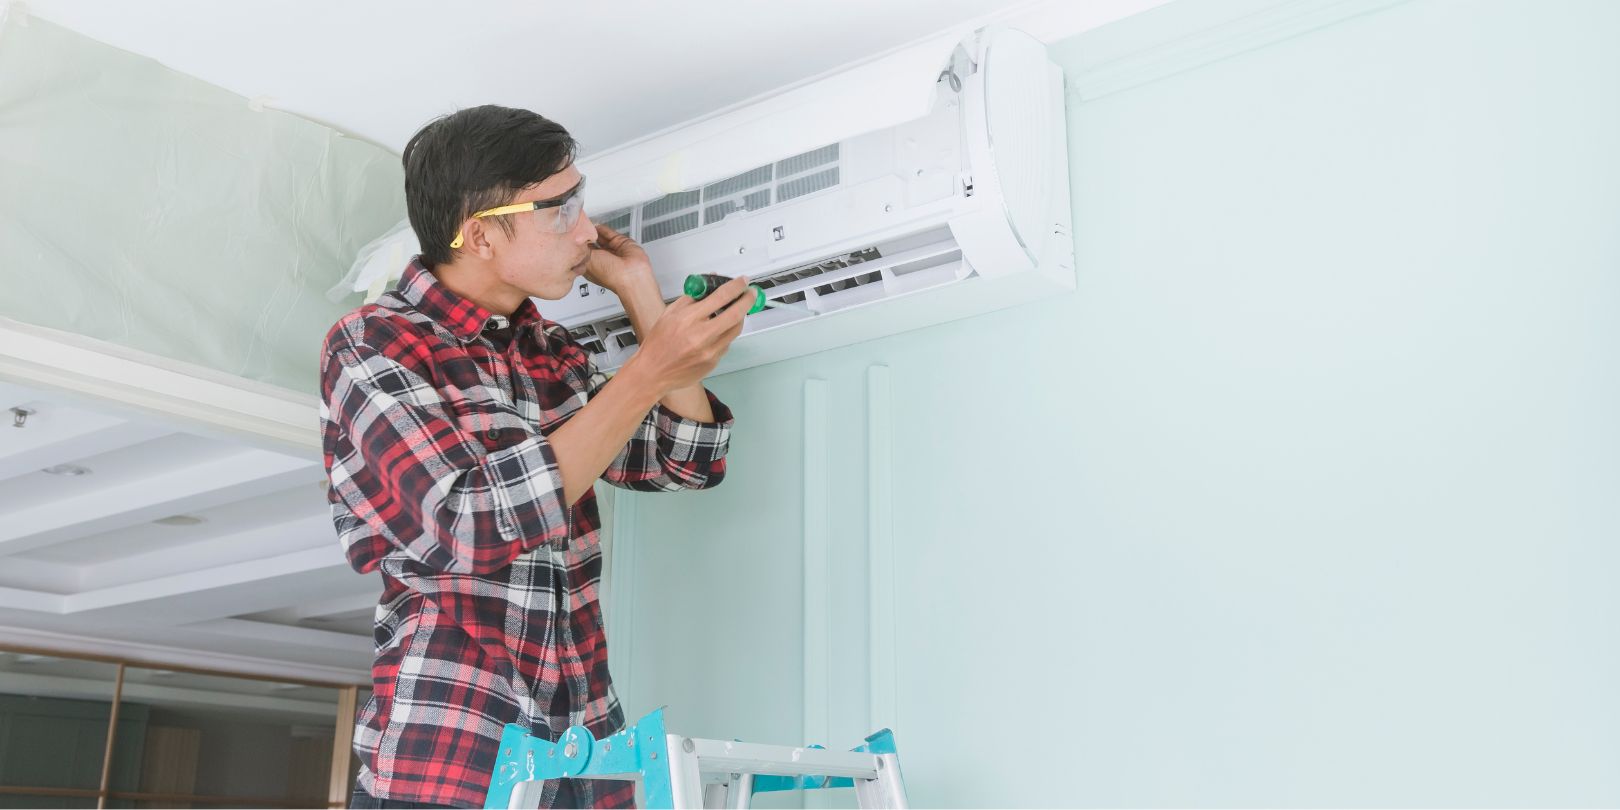 When Should You Replace Your Air Conditioner